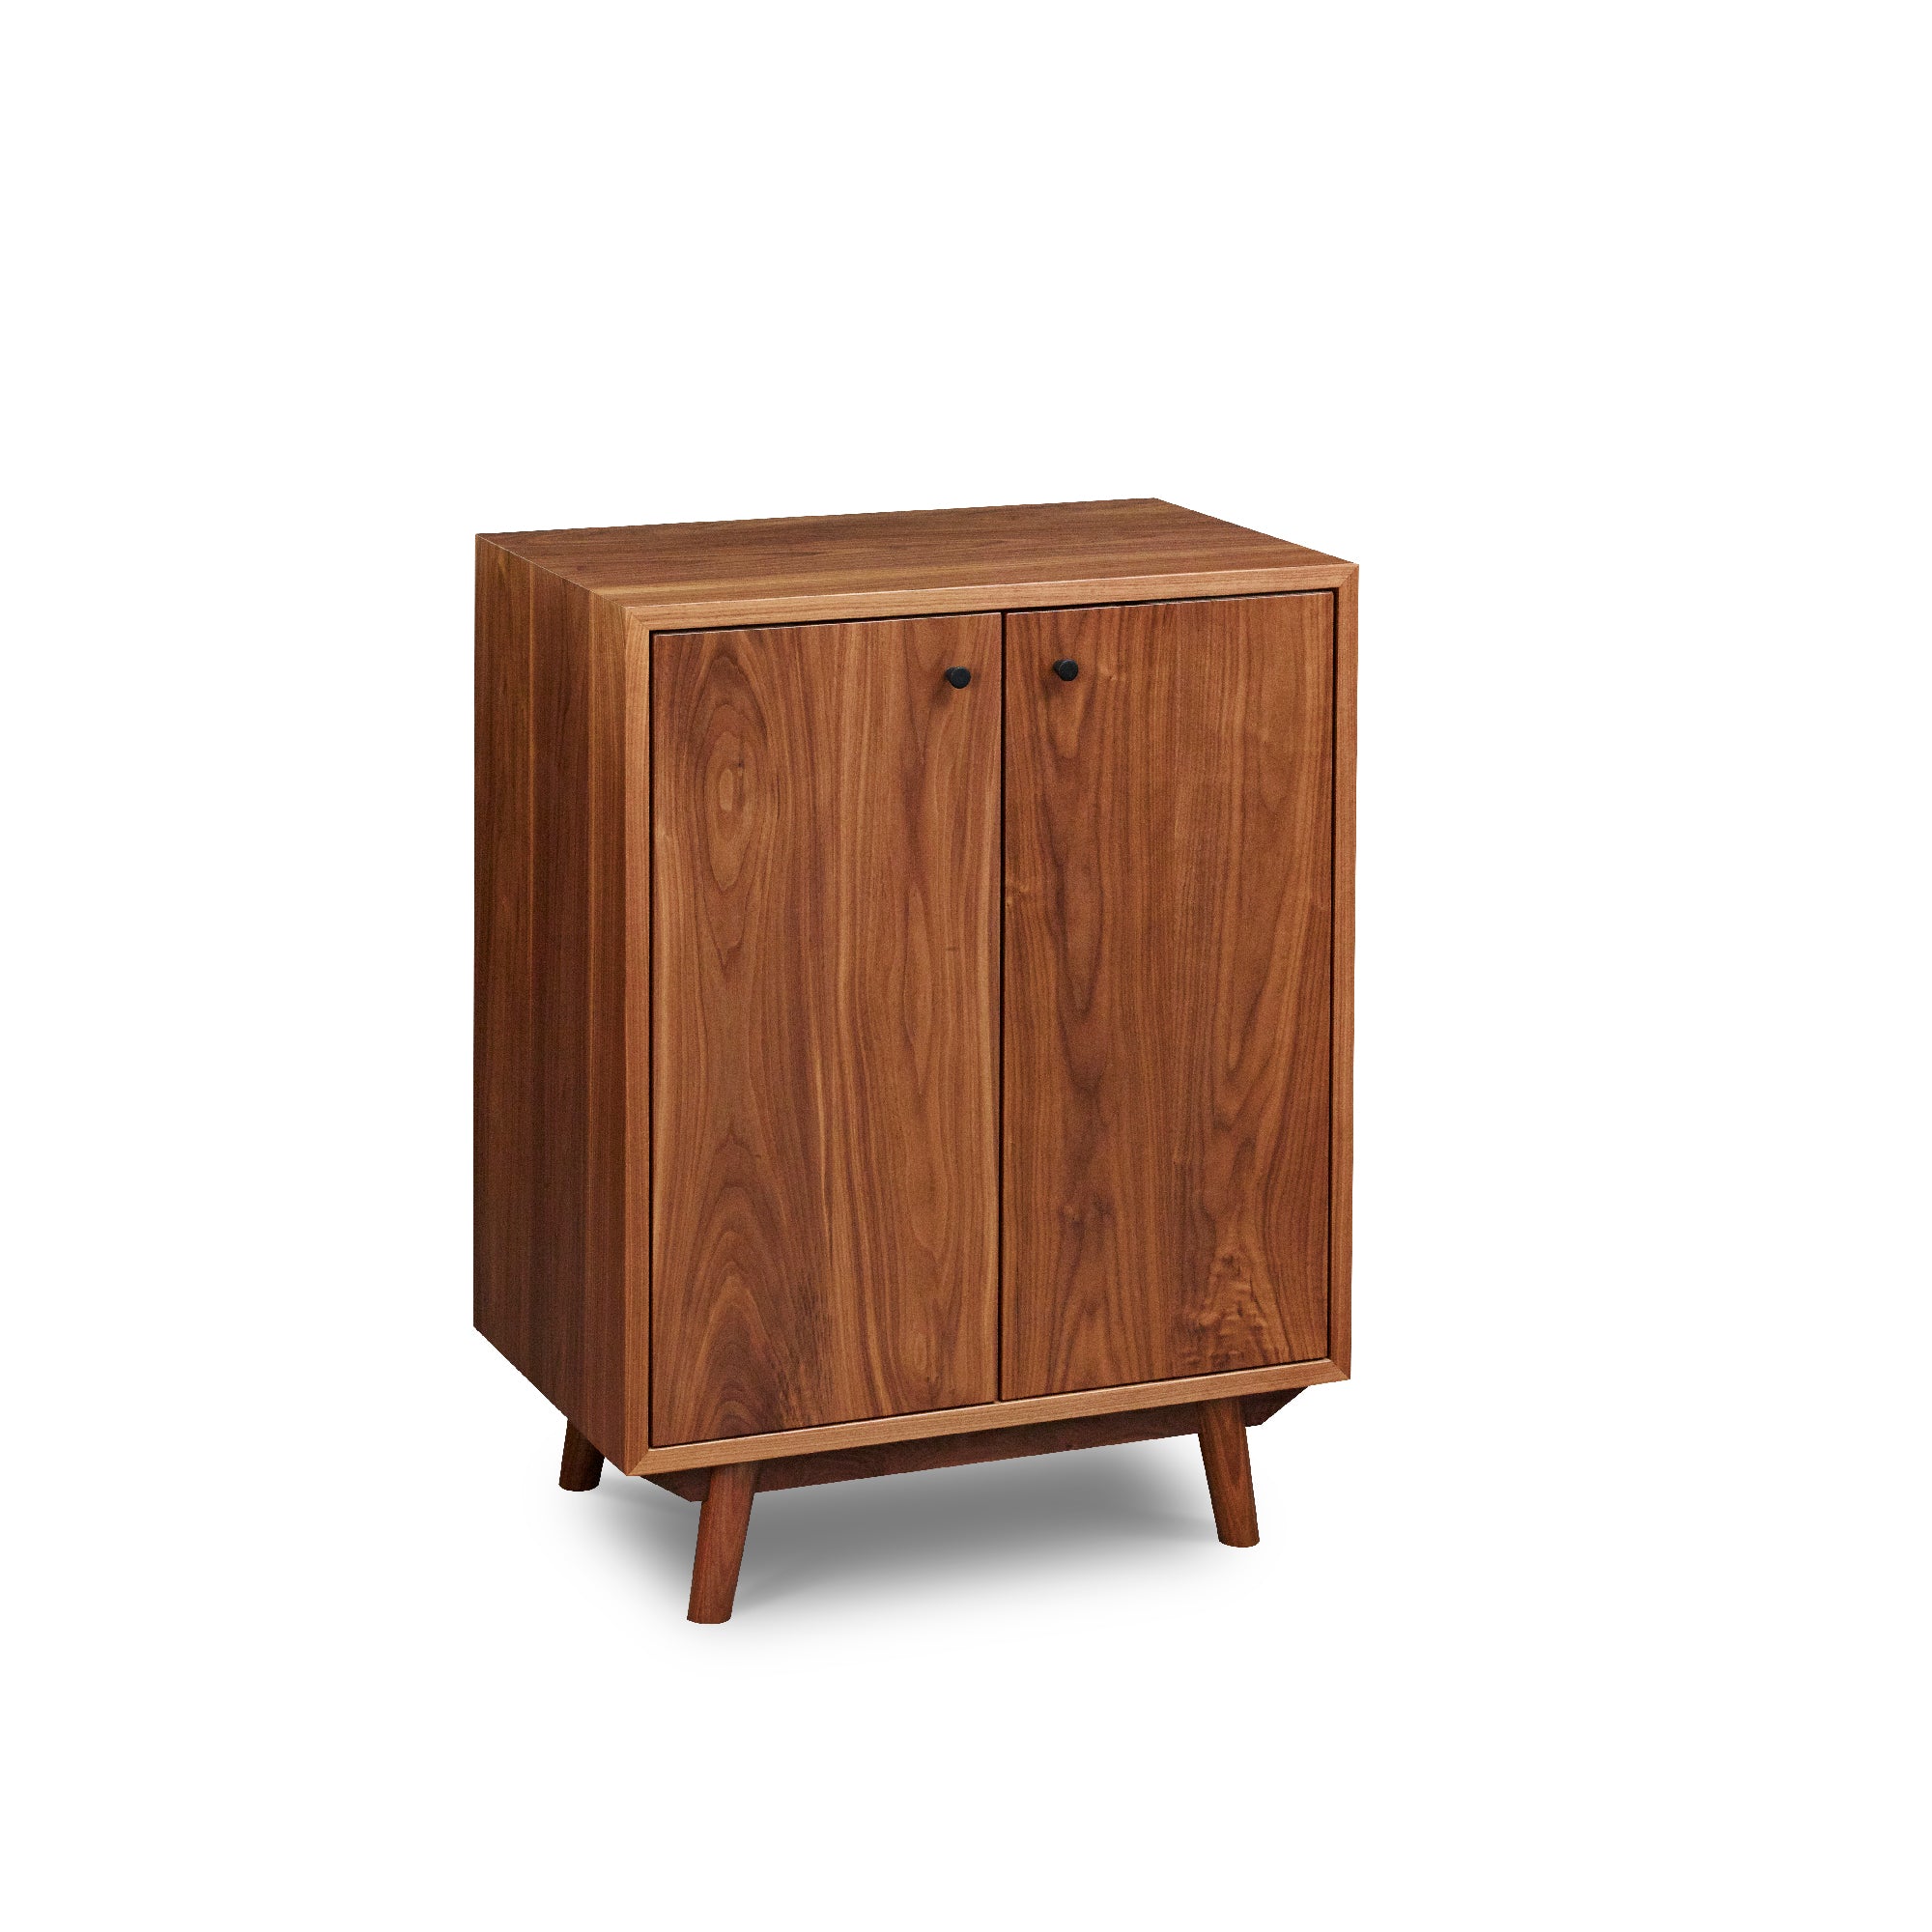 Mid-century Scandinavian inspired sideboard with angled legs in solid walnut wood